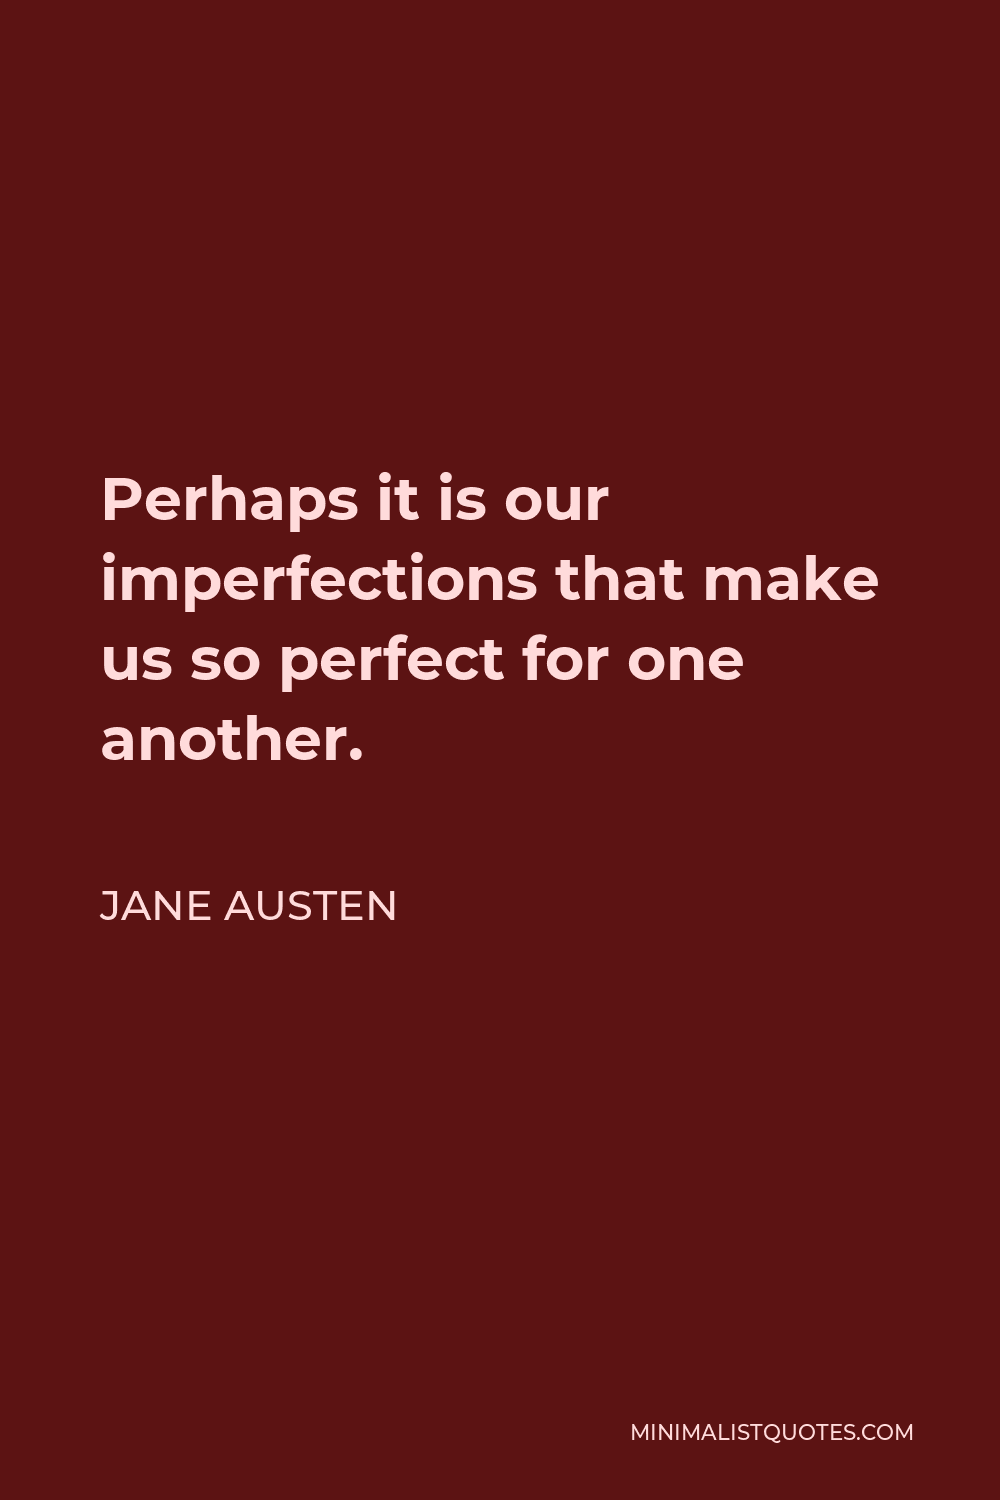 Jane Austen Quote - Perhaps it is our imperfections that make us so perfect for one another.